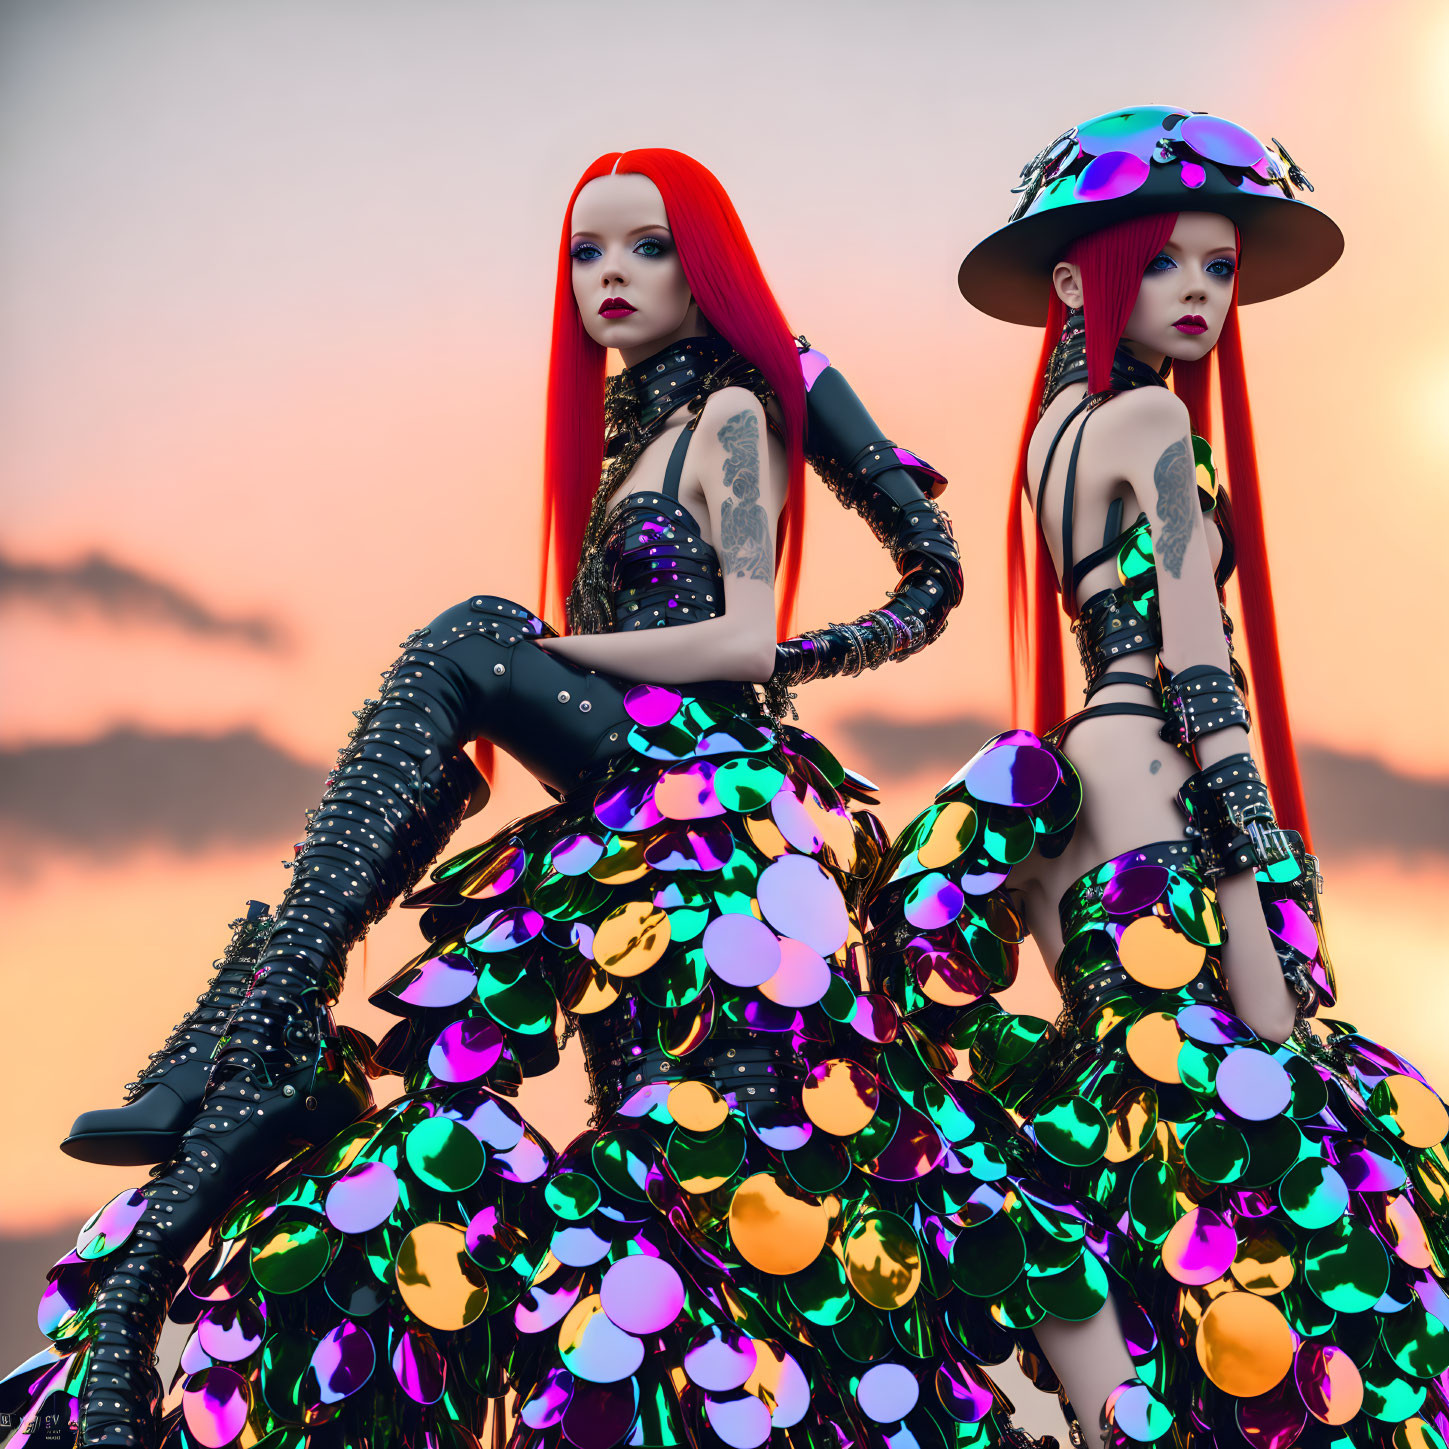 Red-haired models in sequin dresses and platform boots under sunset sky